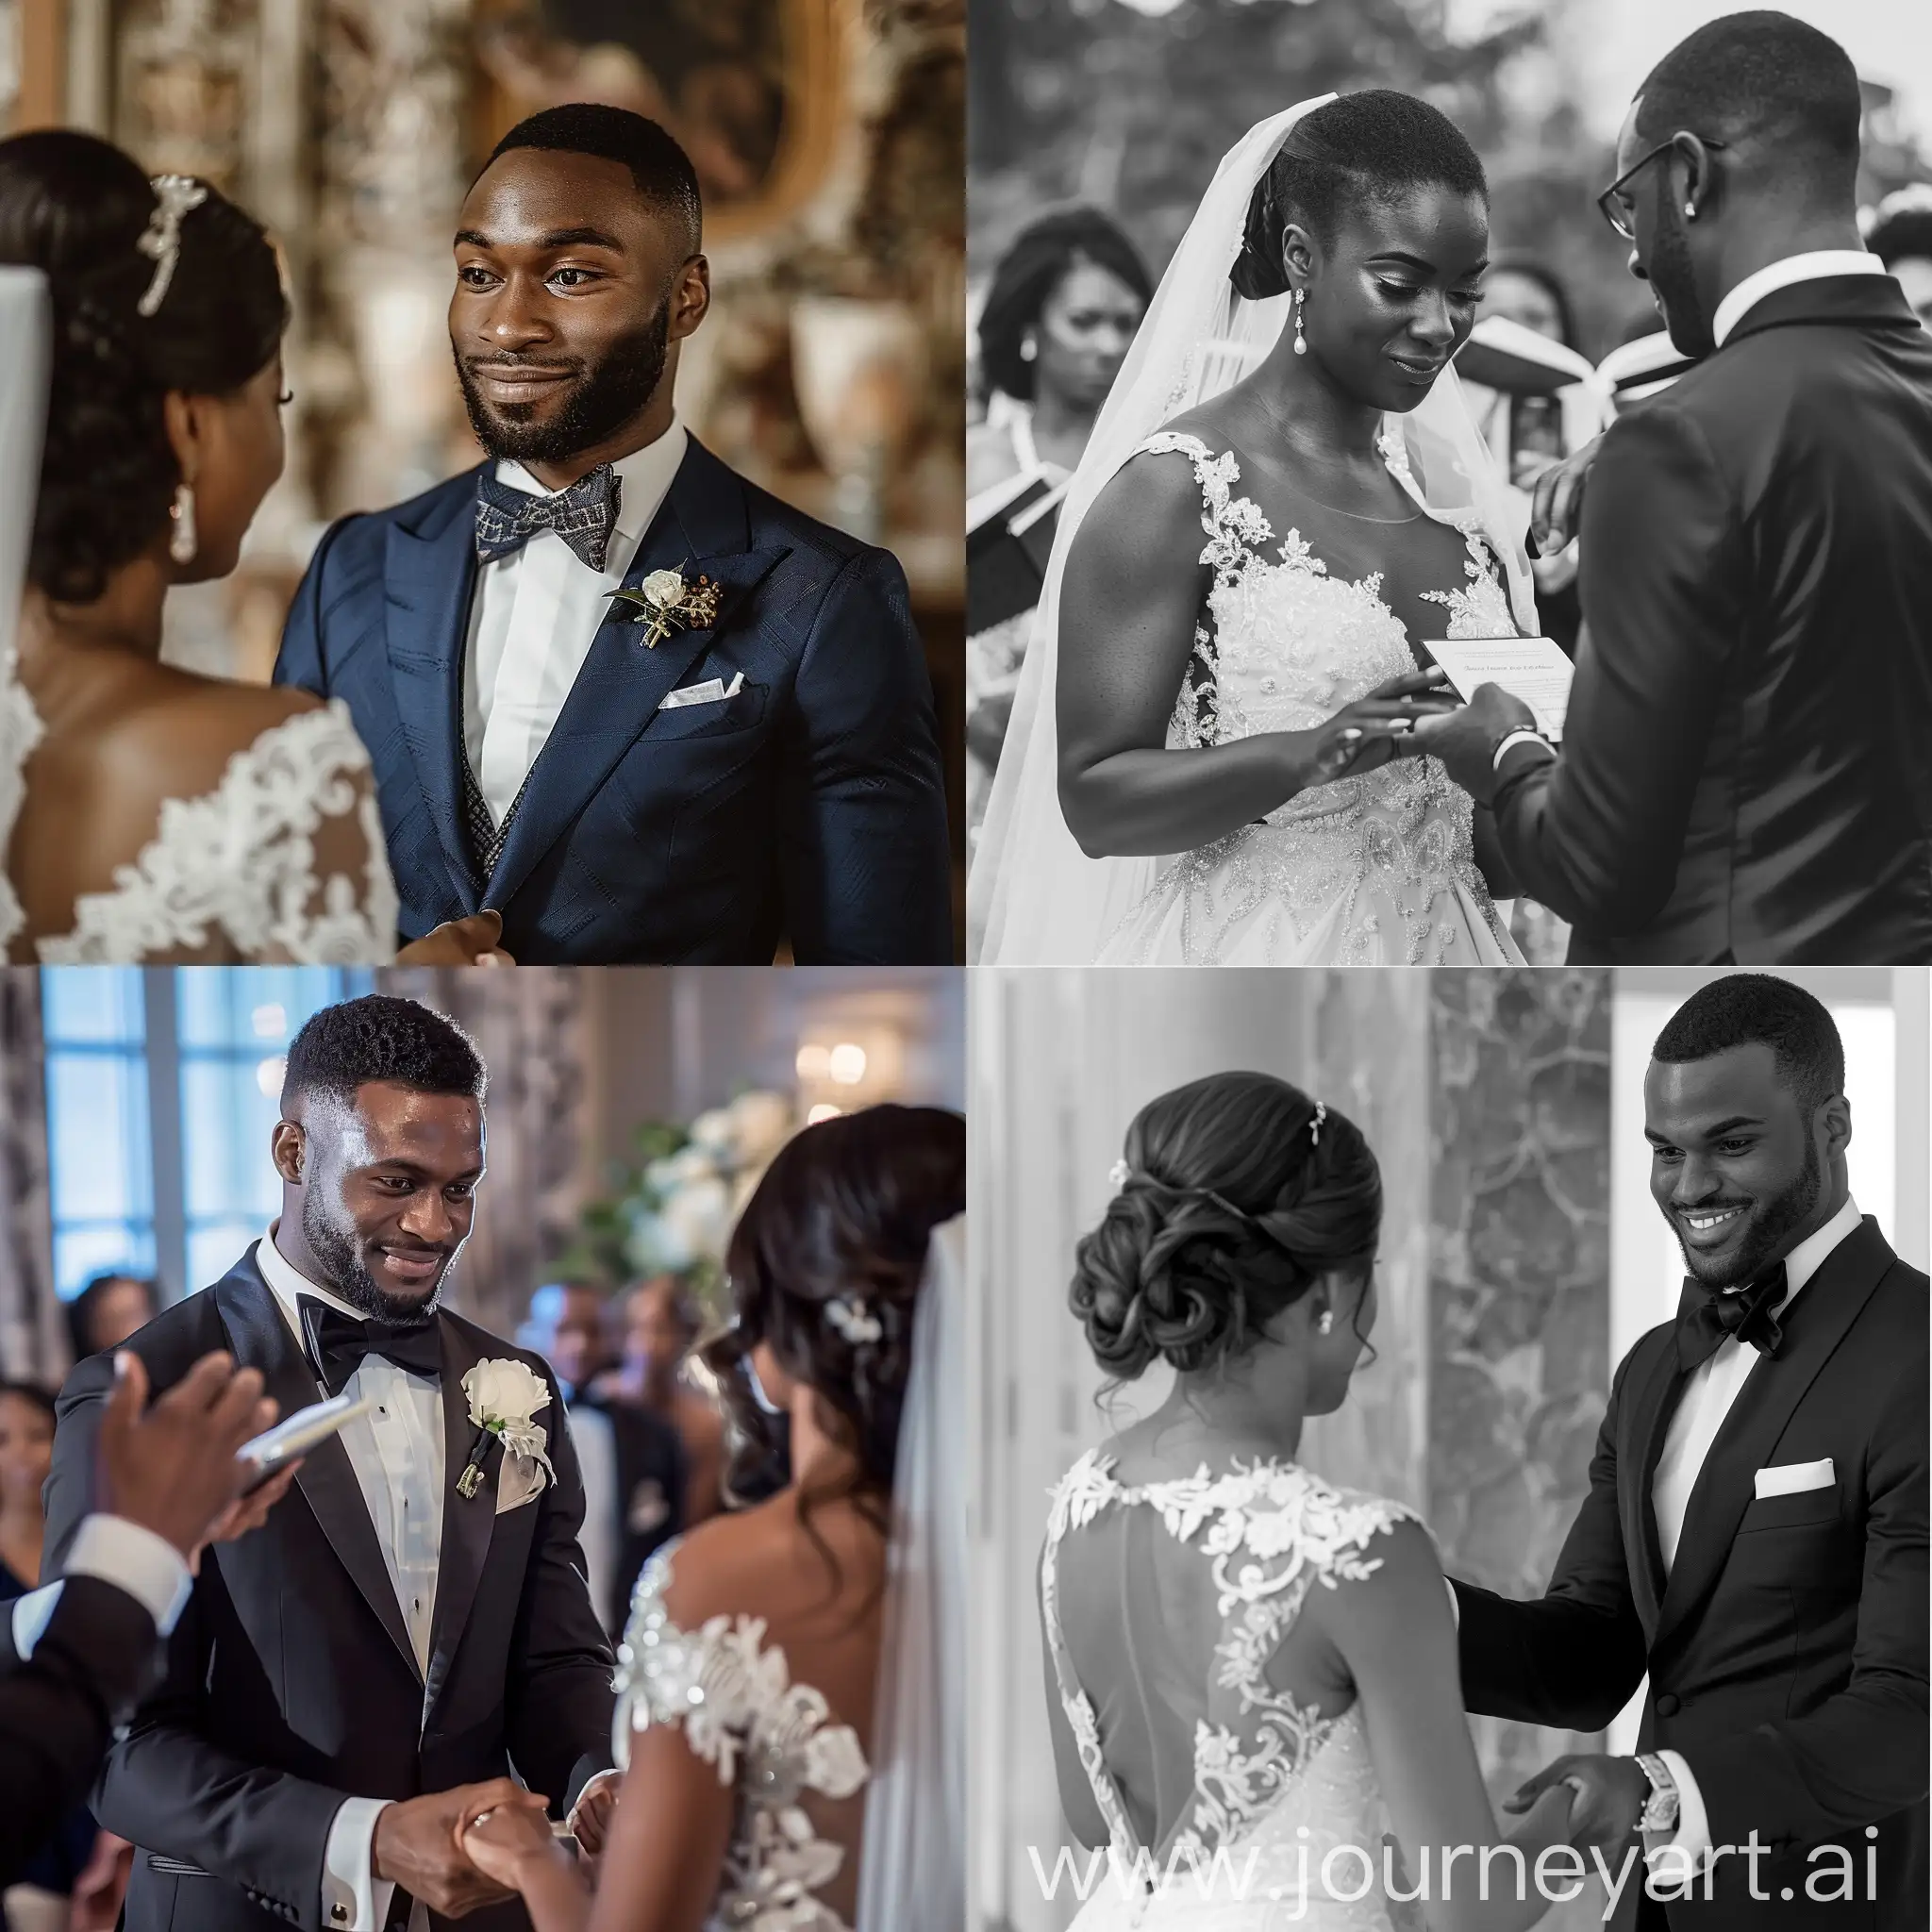 Romantic-Proposal-The-Groom-Asks-for-the-Brides-Hand